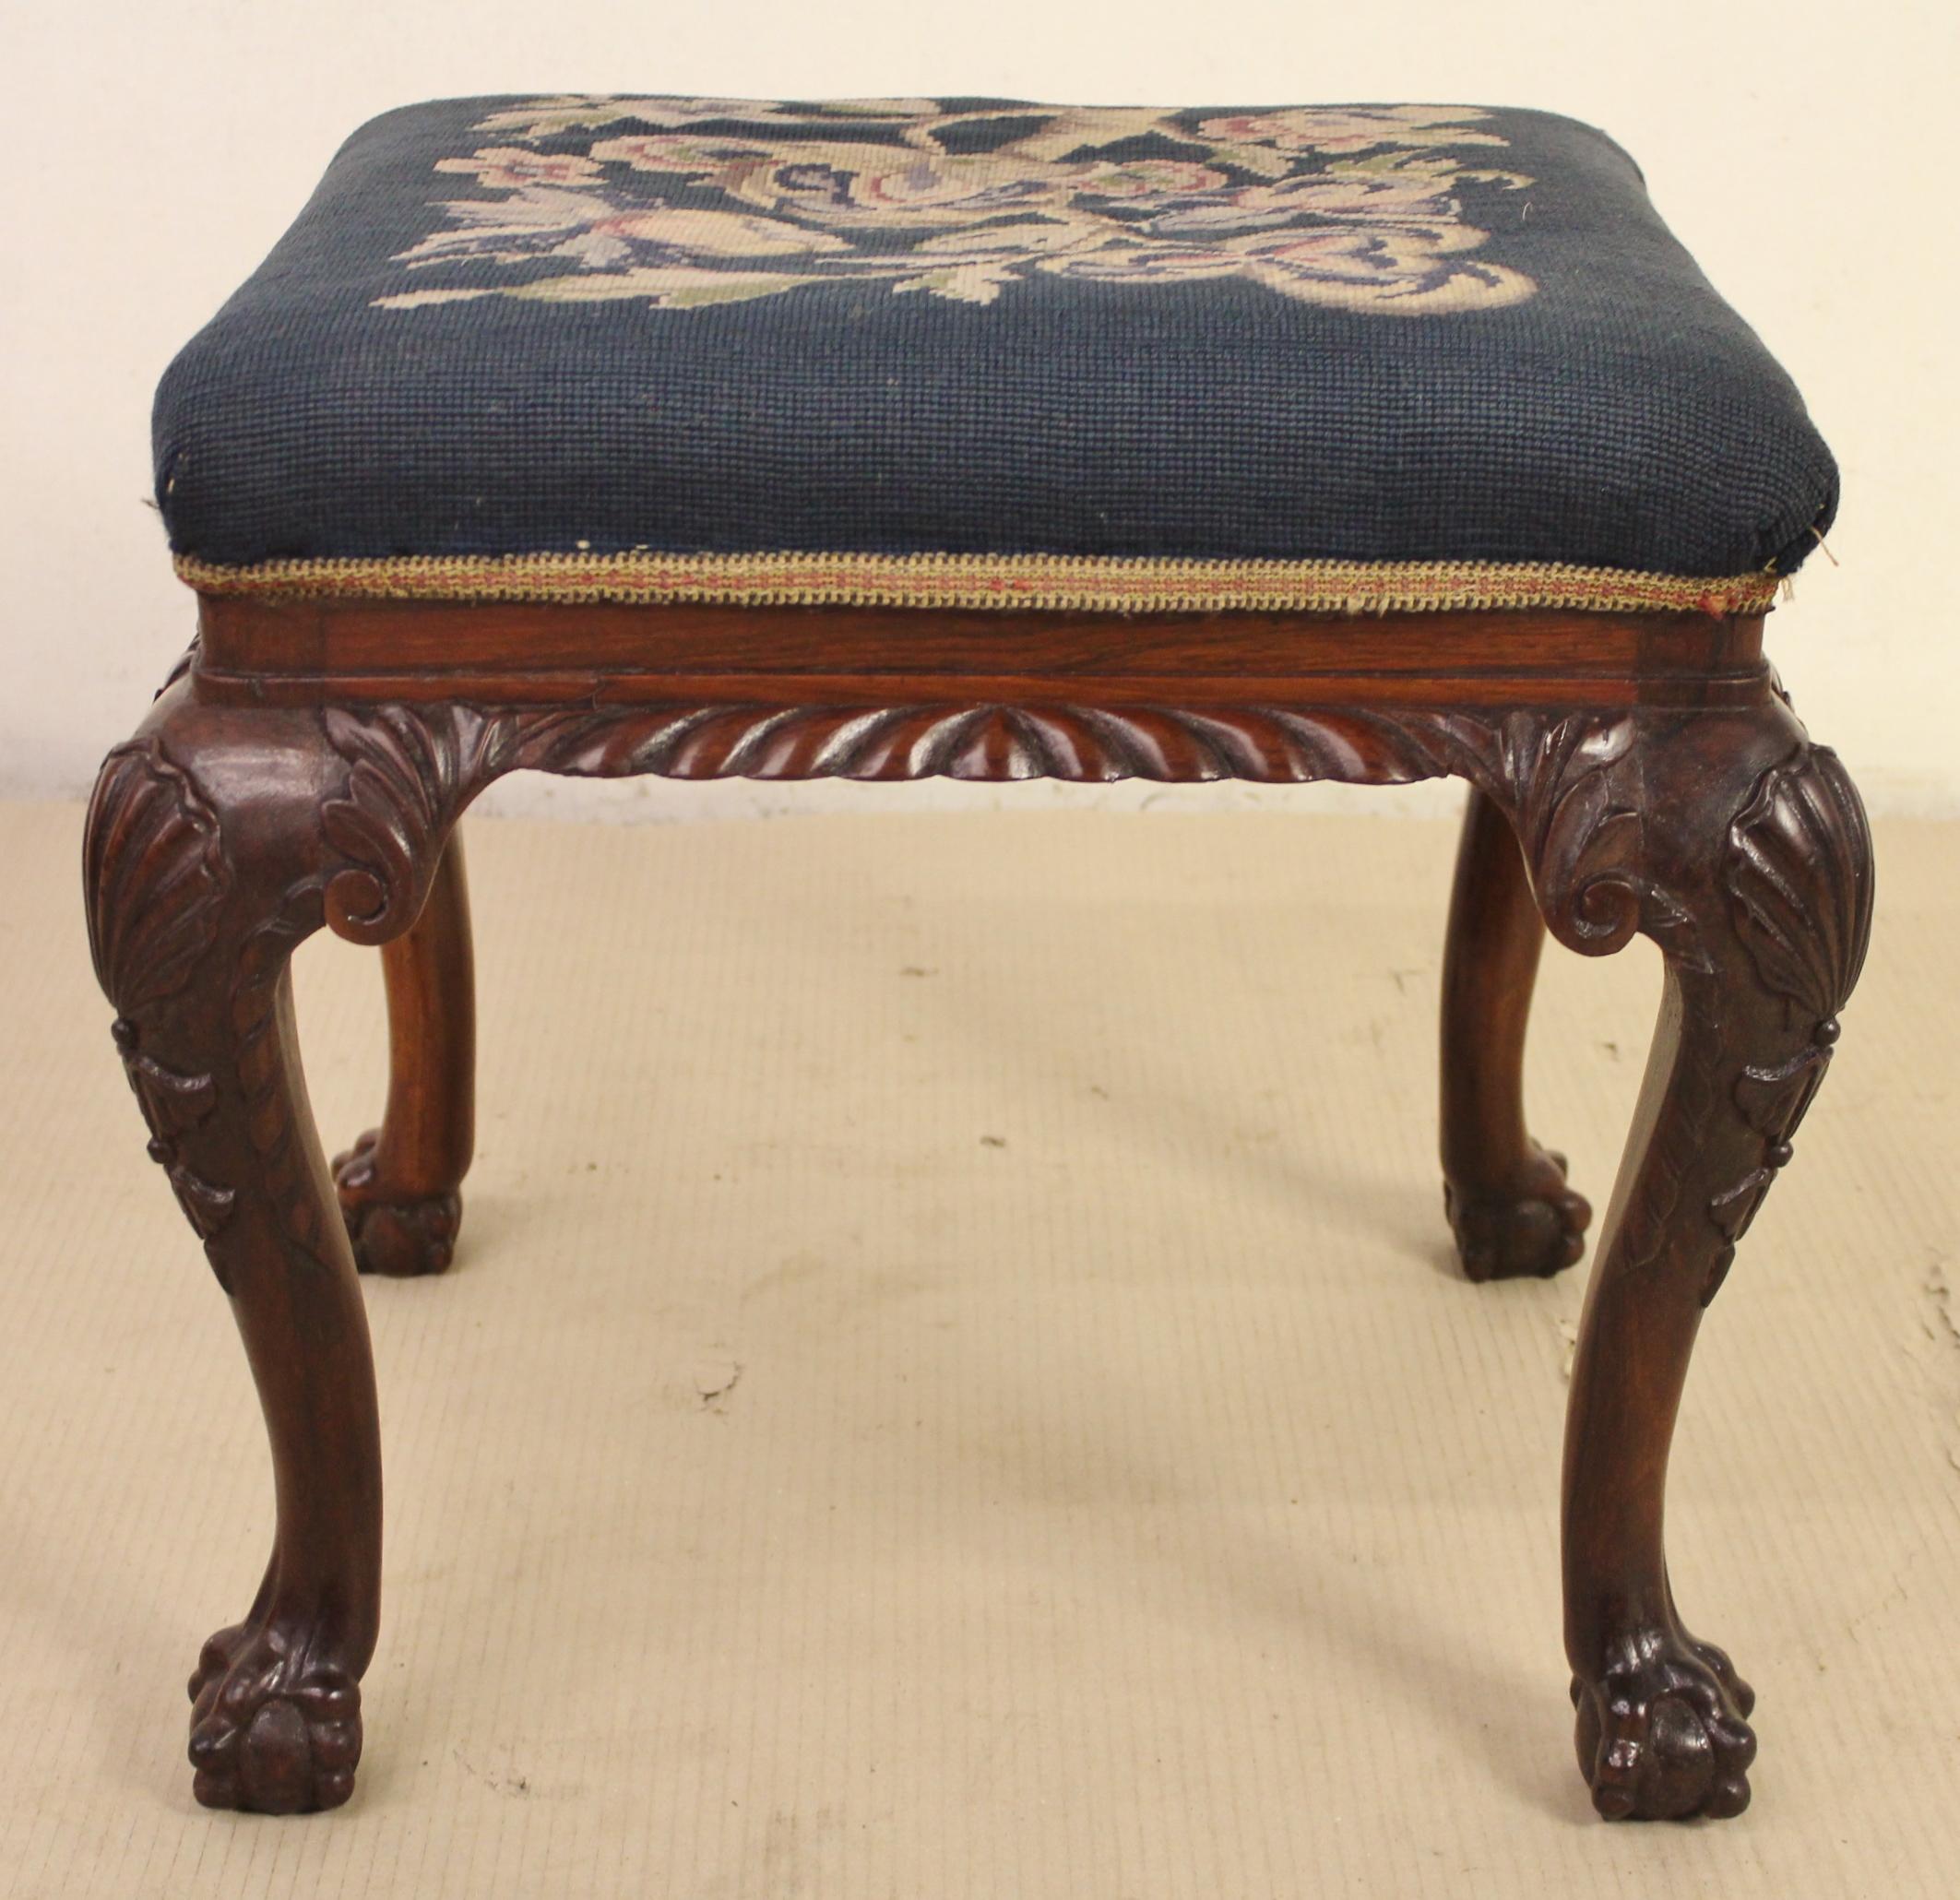 A charming Victorian period rosewood upholstered stool. Of fine construction in solid rosewood with an excellent color and patina. It is decorated throughout with crisply carved decorations and the cabriole legs terminate in 